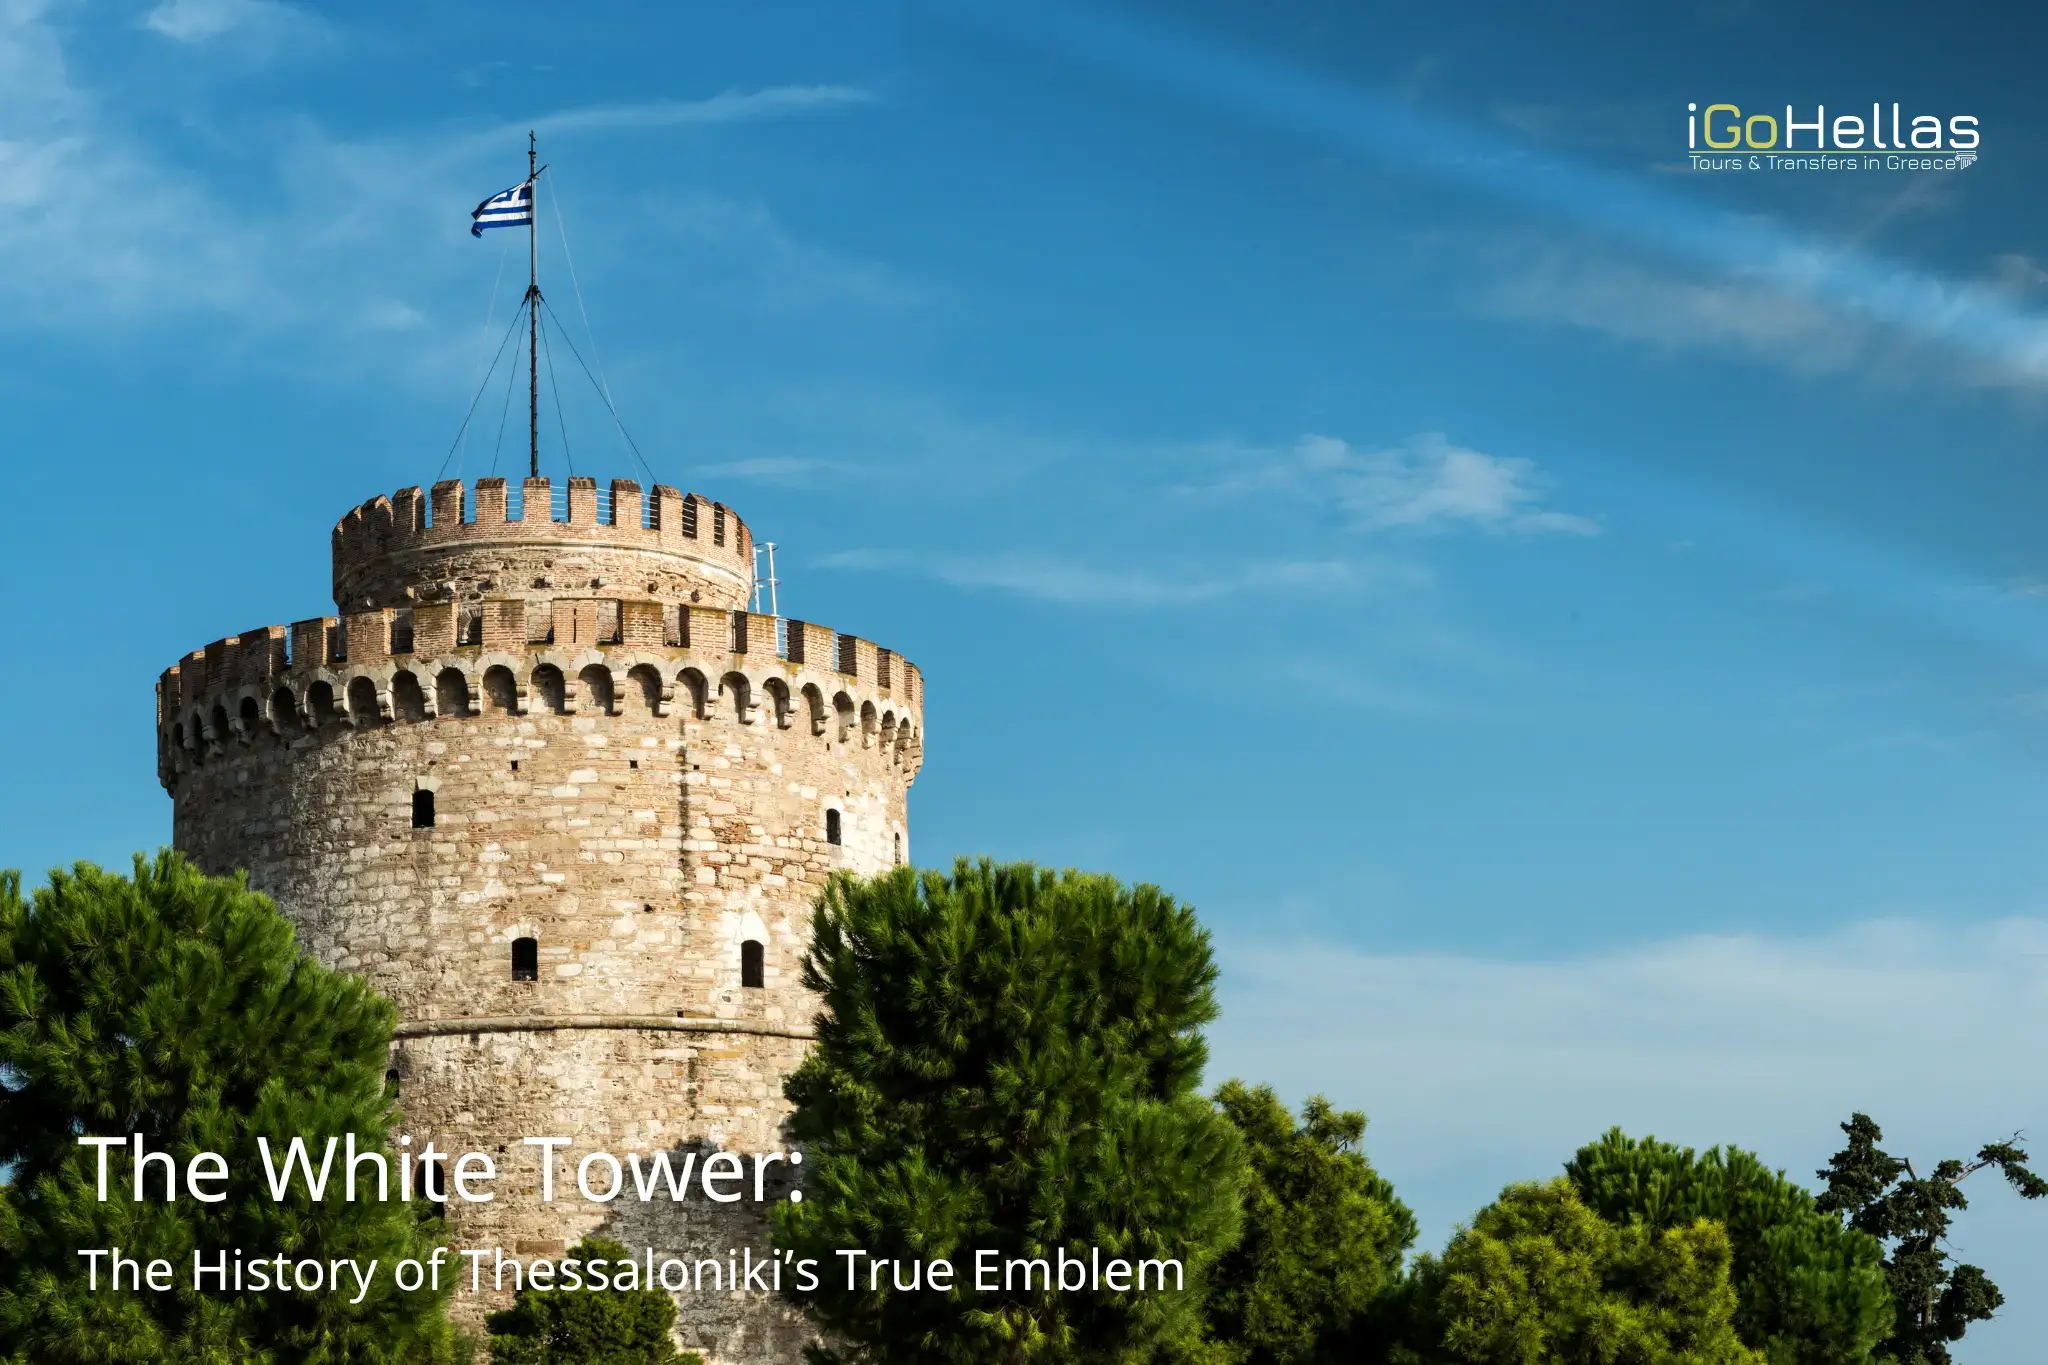 the-white-tower-a-symbol-of-thessalonikis-rich-history